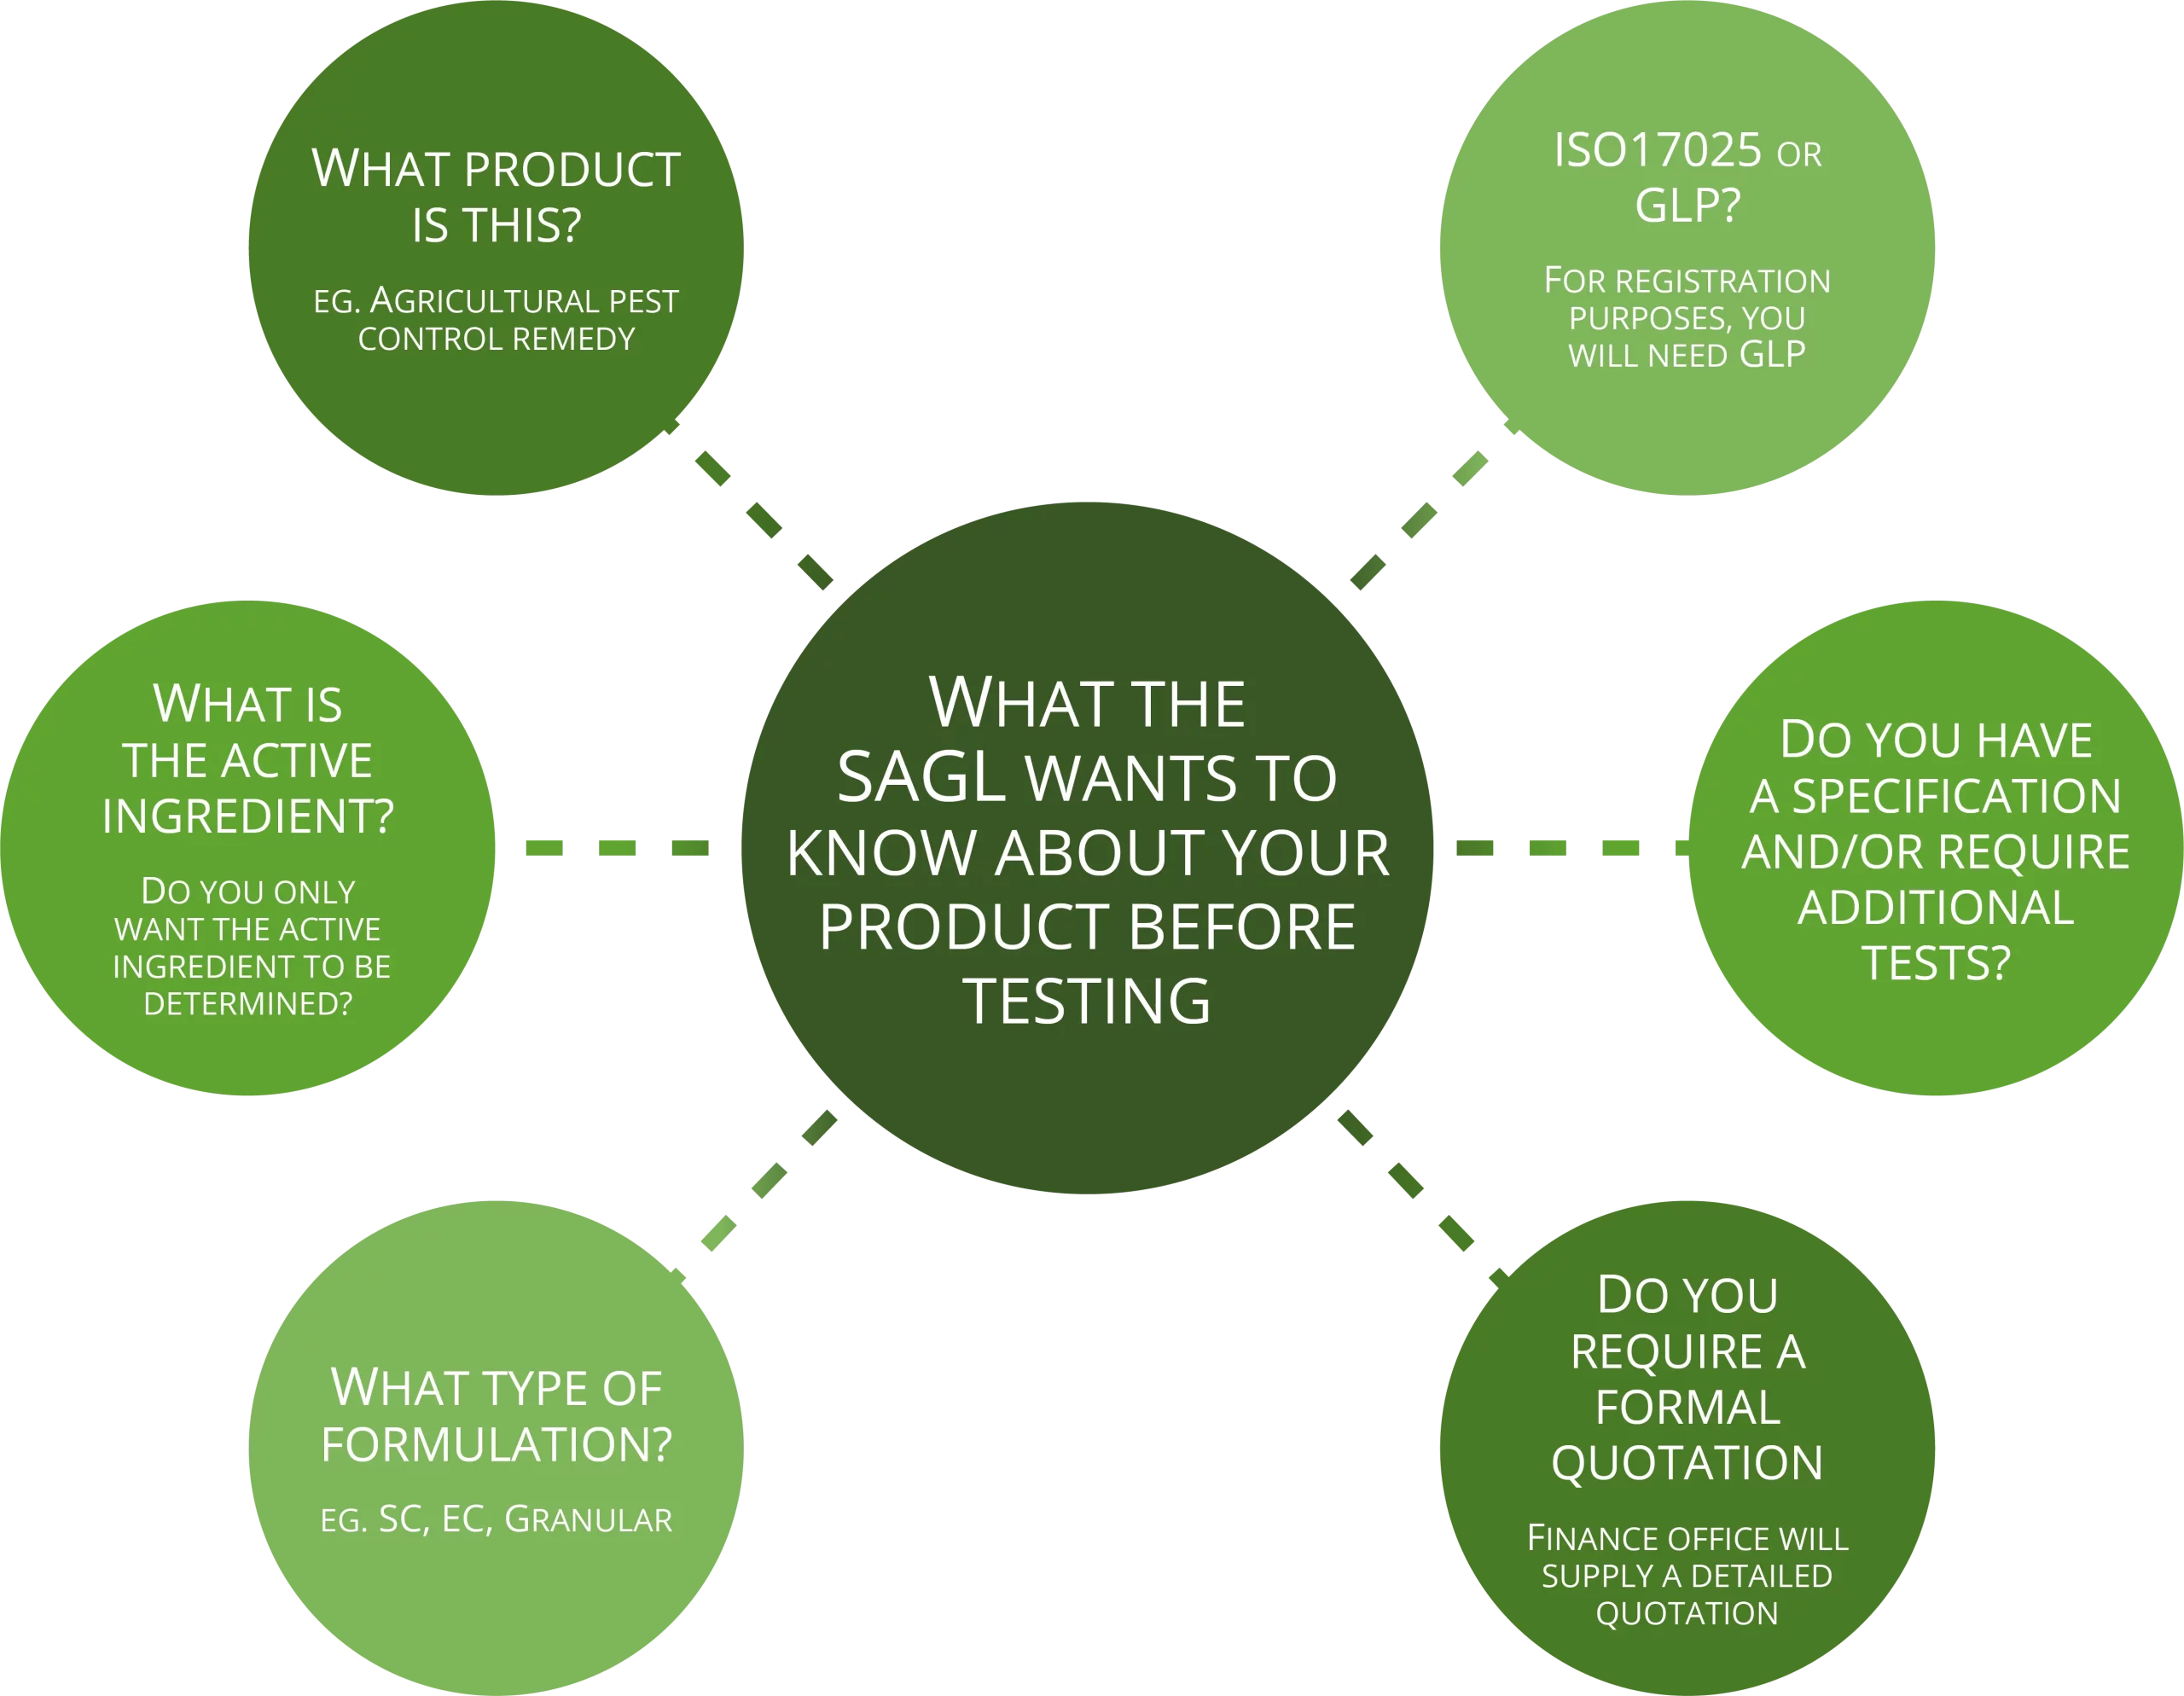 What SAGL needs to know before testing